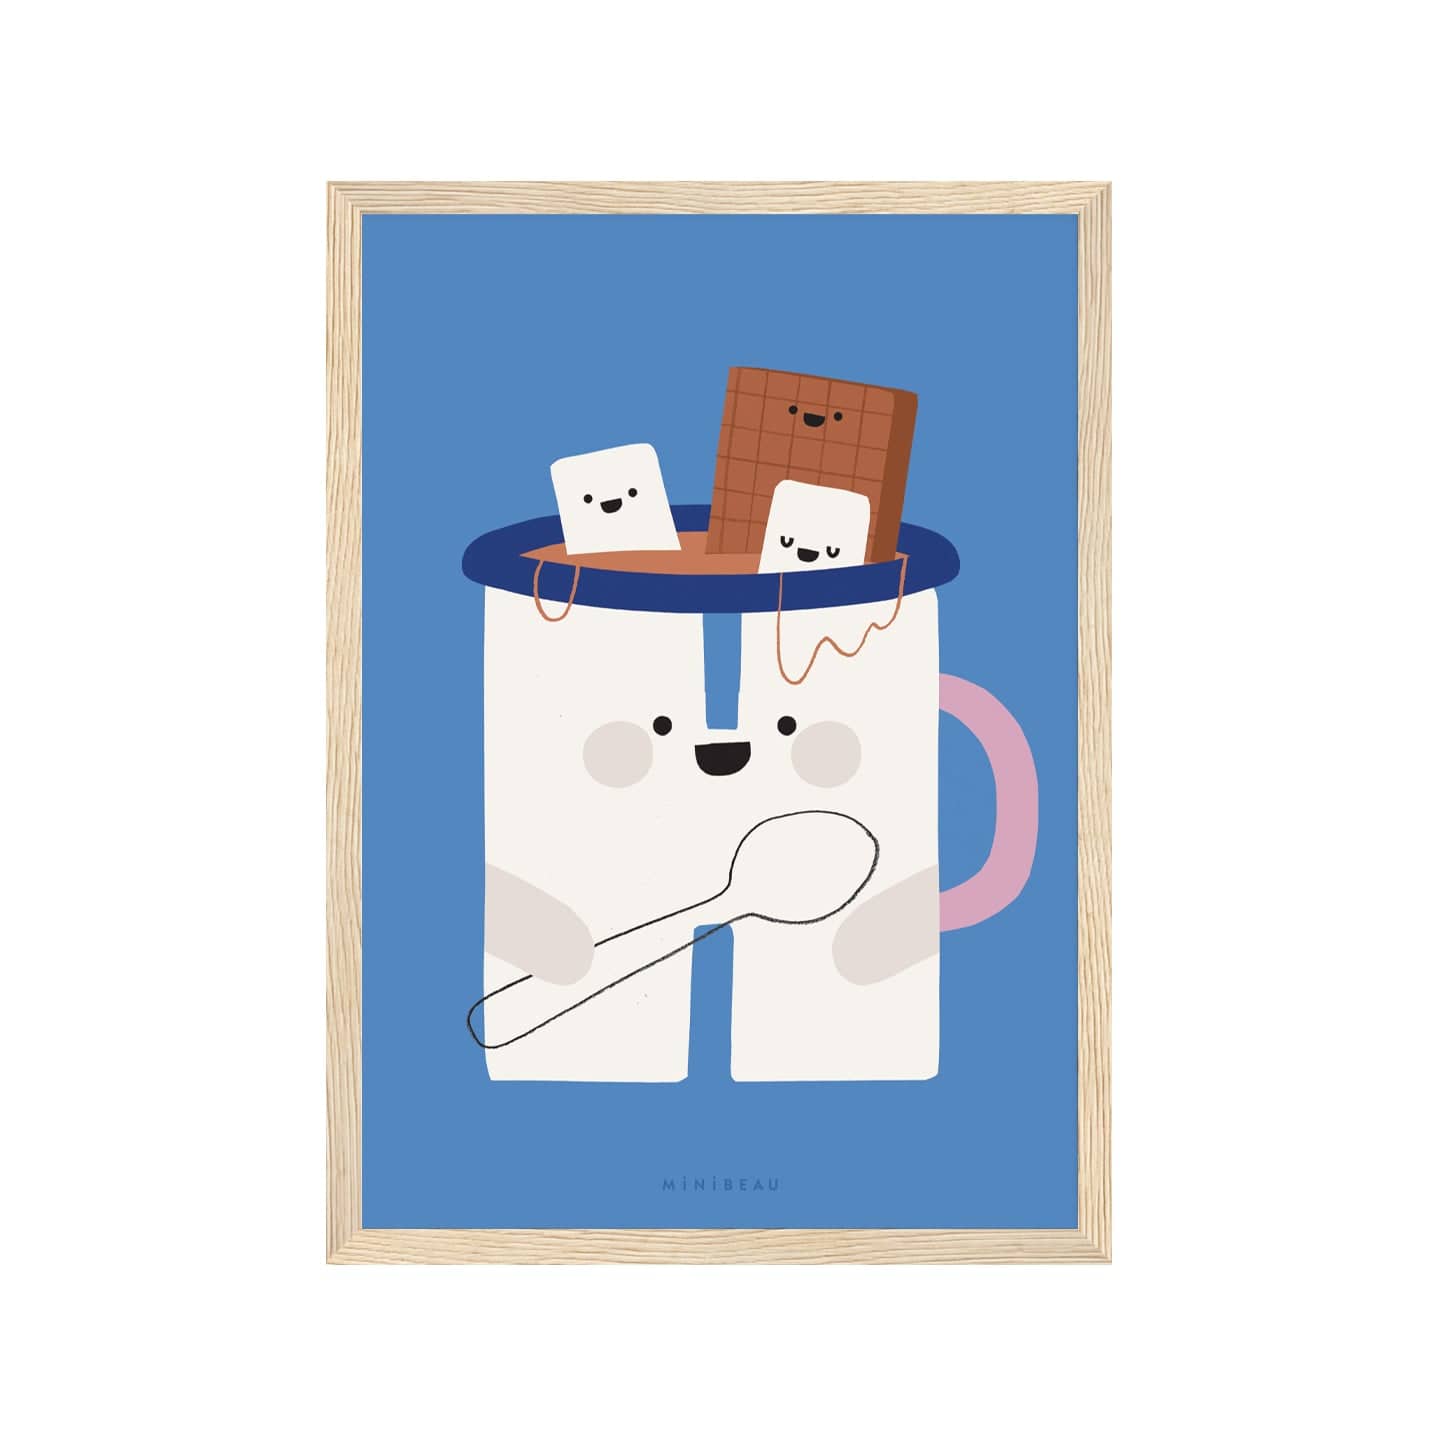 Art print in a light wood frame. Our Happy Alphabet 'H' Art Print shows a smiling pink handled, white mug of hot chocolate, holding a spoon, with smiling marshmallows and chocolate bar sitting in the hot chocolate, on a blue background.